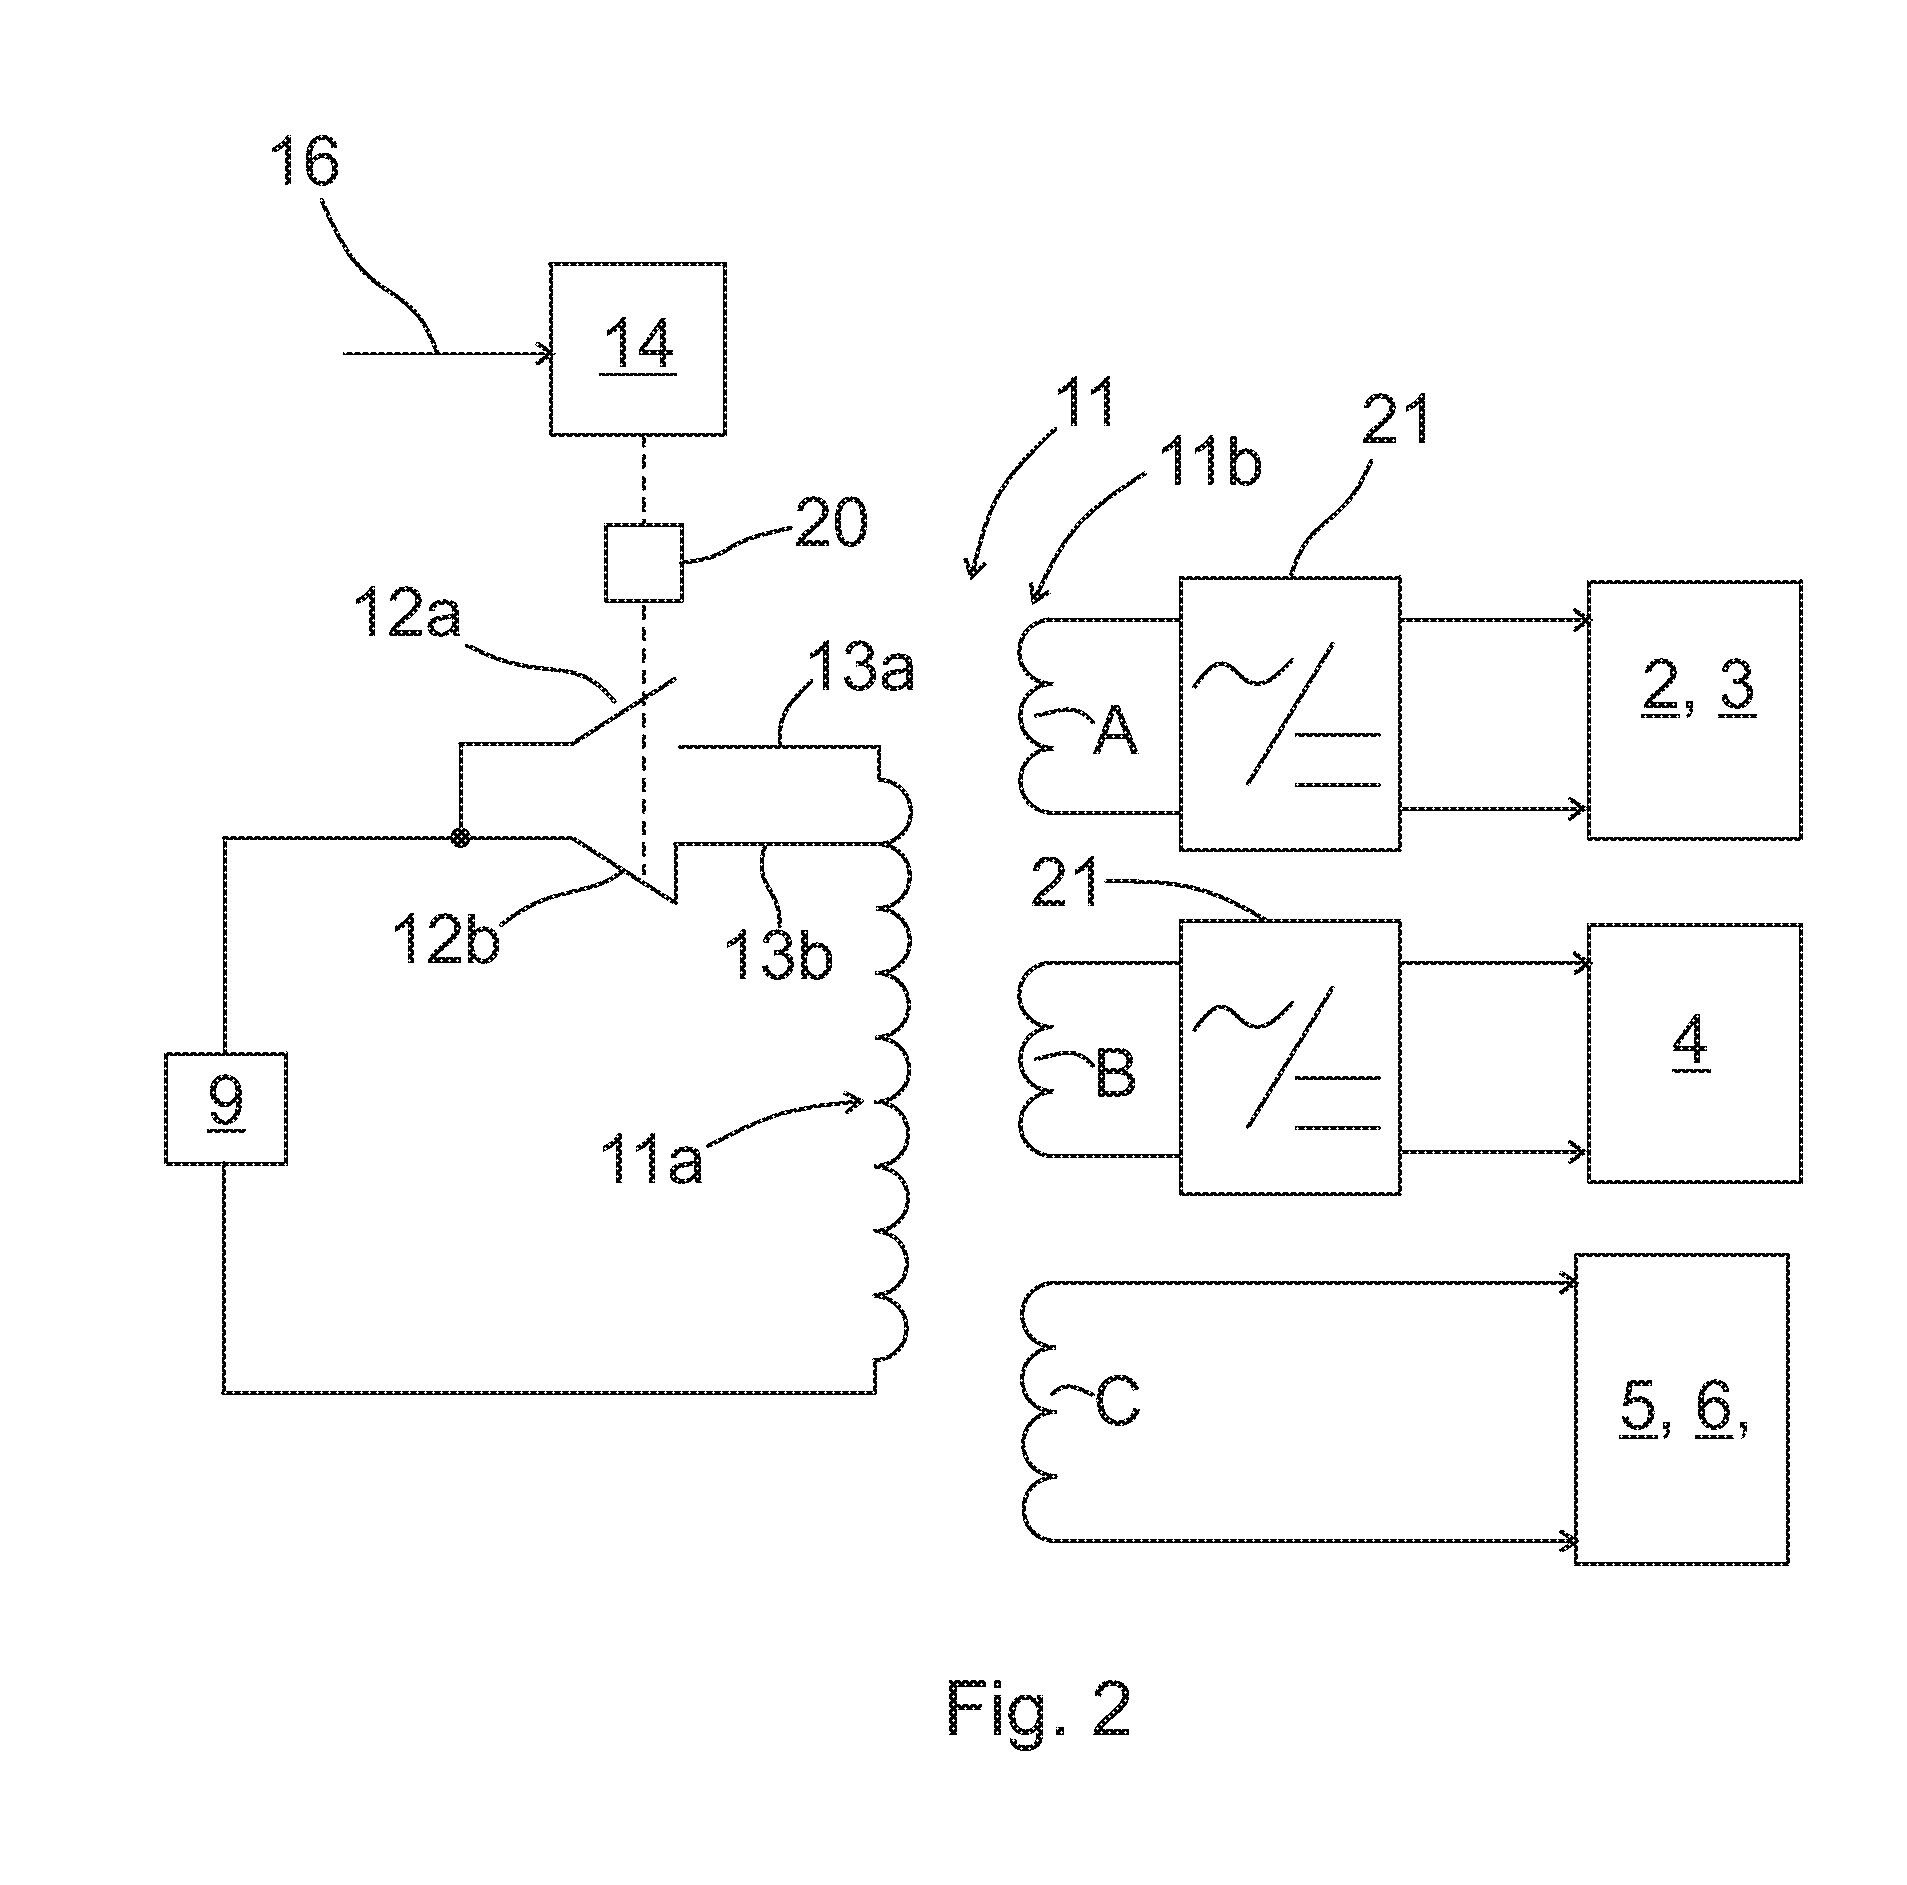 Electricity supply apparatus and an elevator system